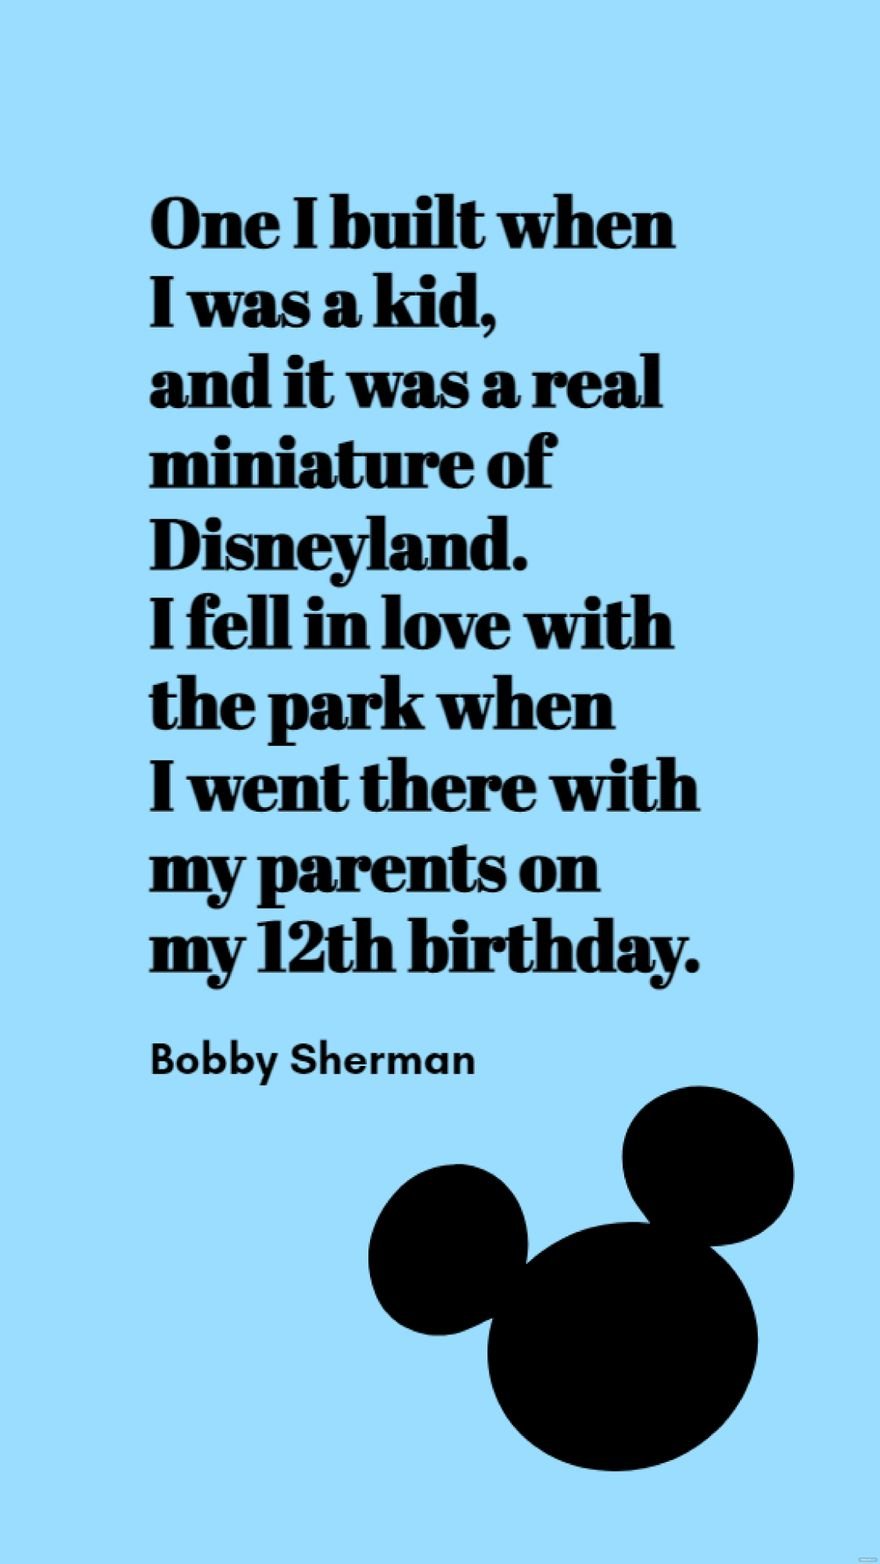 Bobby Sherman - One I built when I was a kid, and it was a real miniature of Disneyland. I fell in love with the park when I went there with my parents on my 12th birthday.